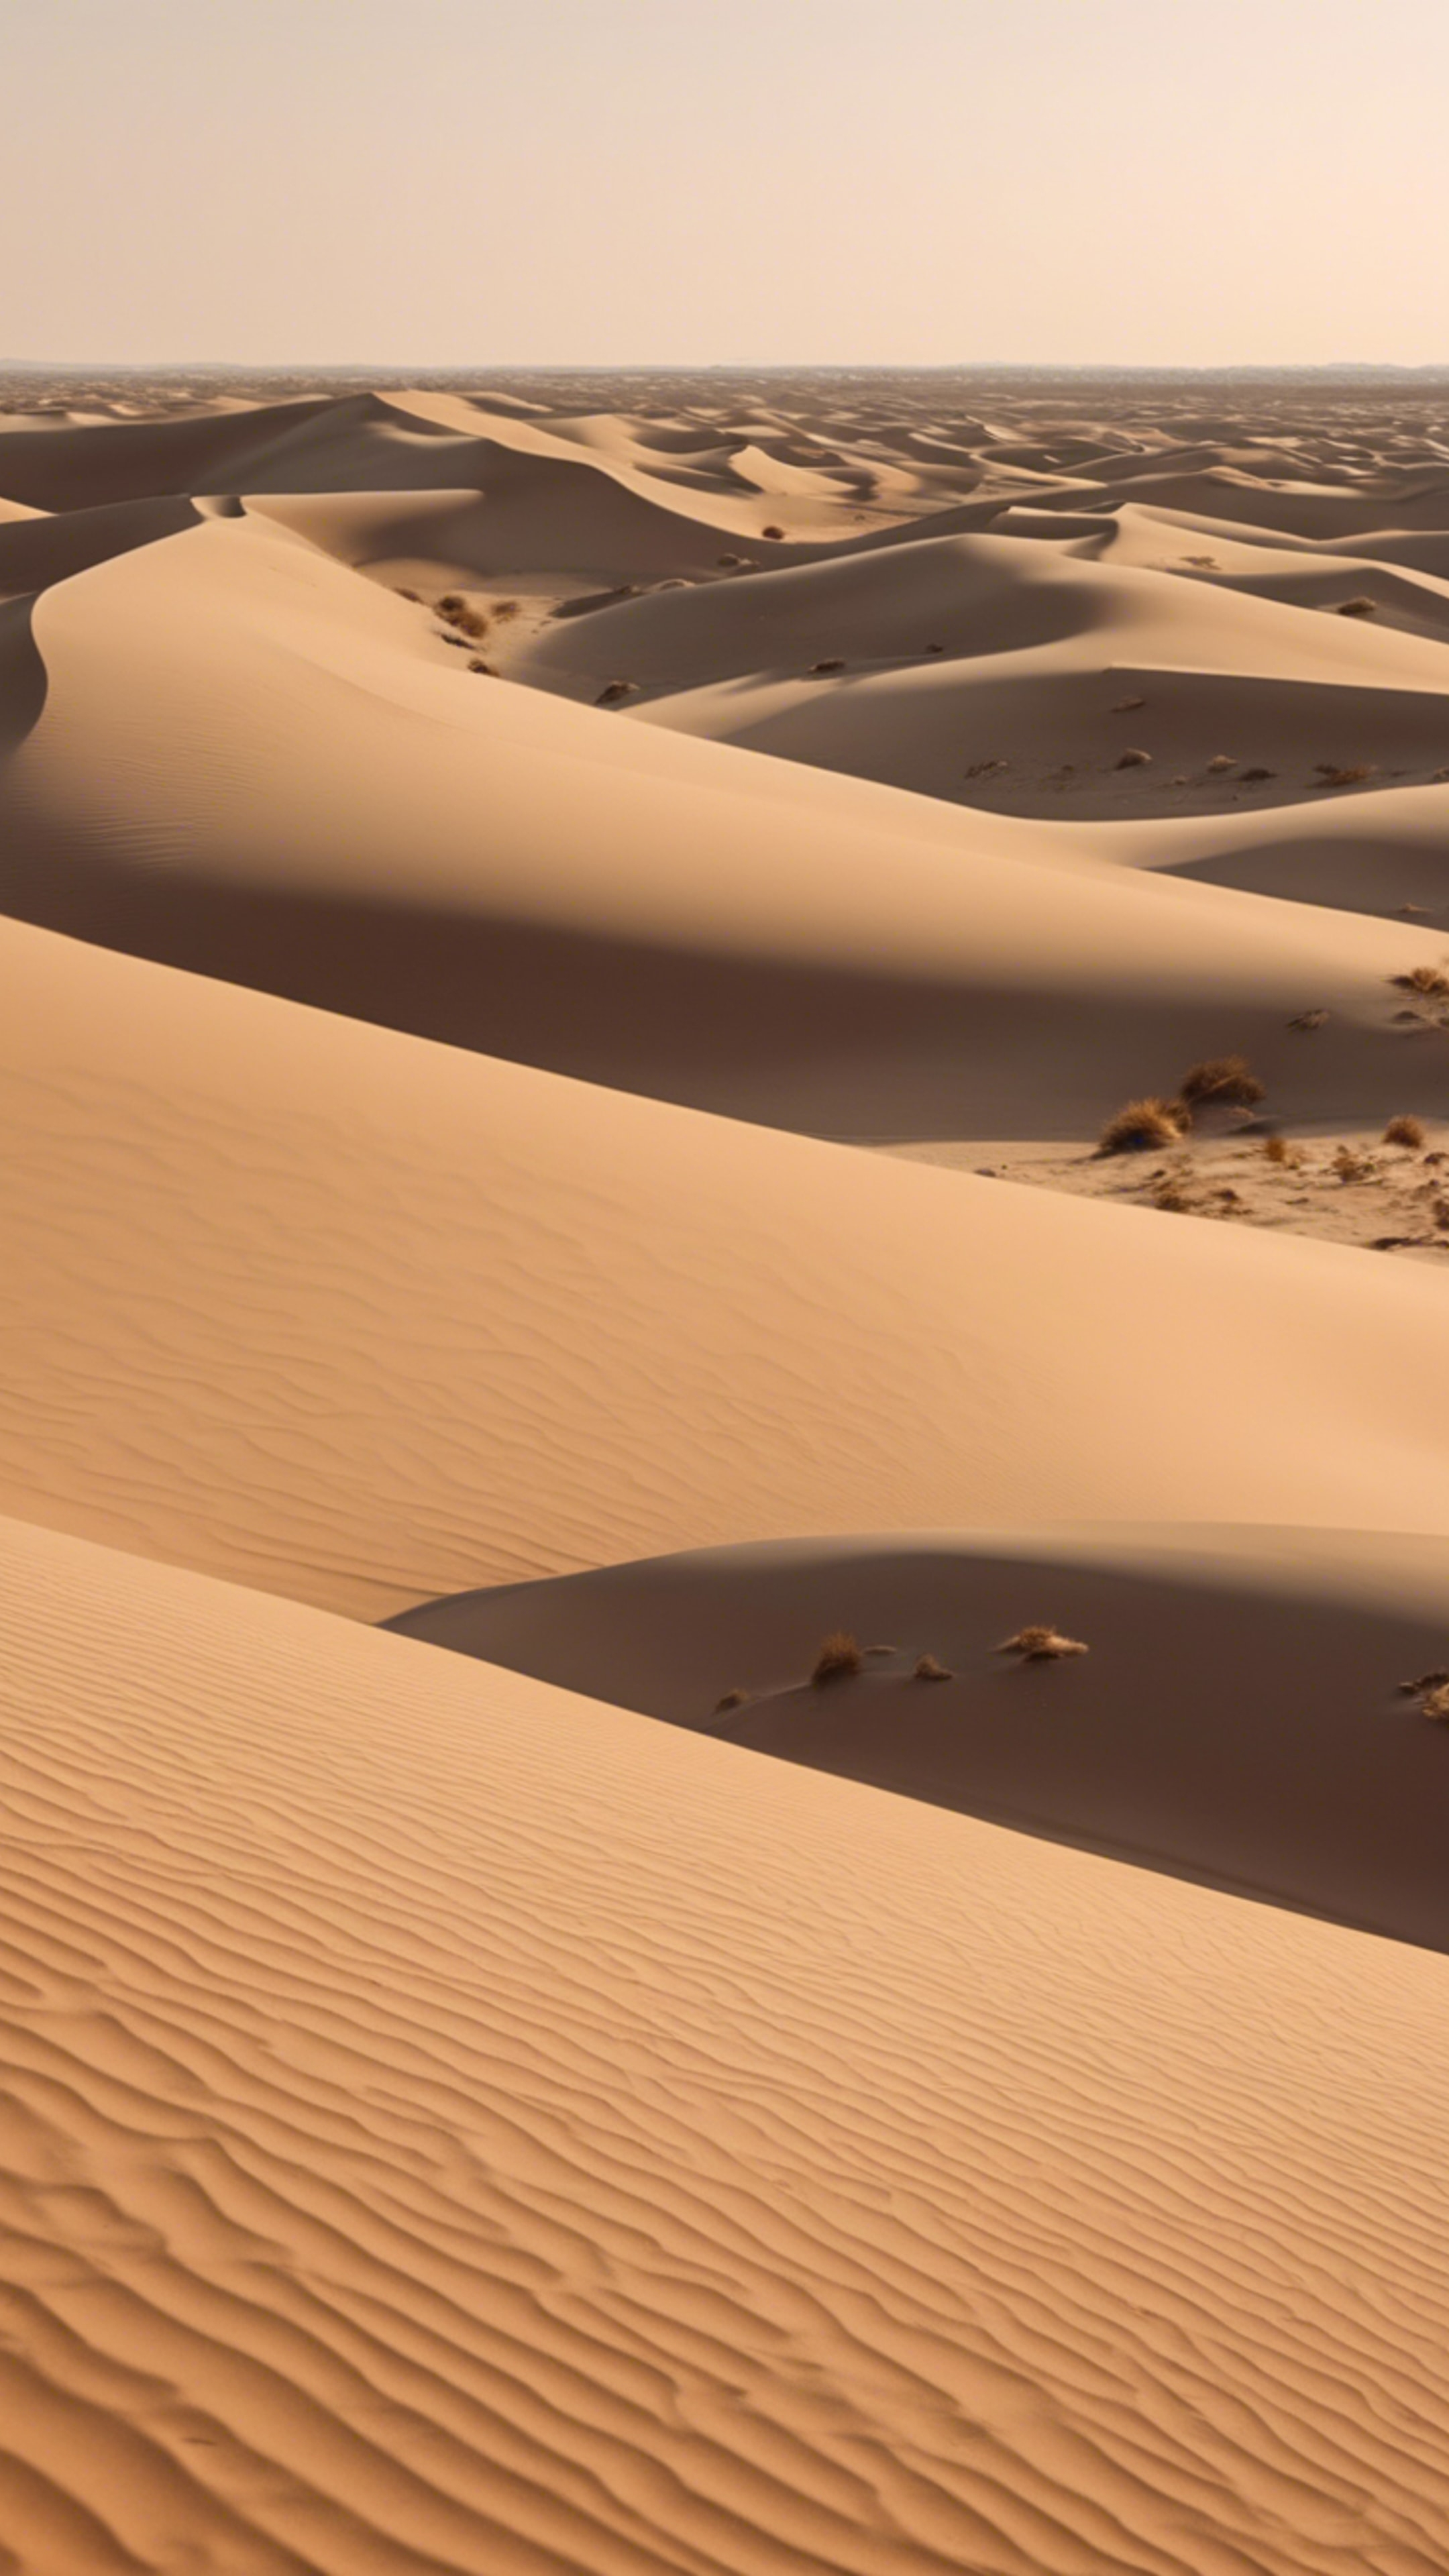 A sea of sand dunes under the hot desert sun, showing off different shades of cool beige.壁紙[a9abeda4731b4762b3d0]